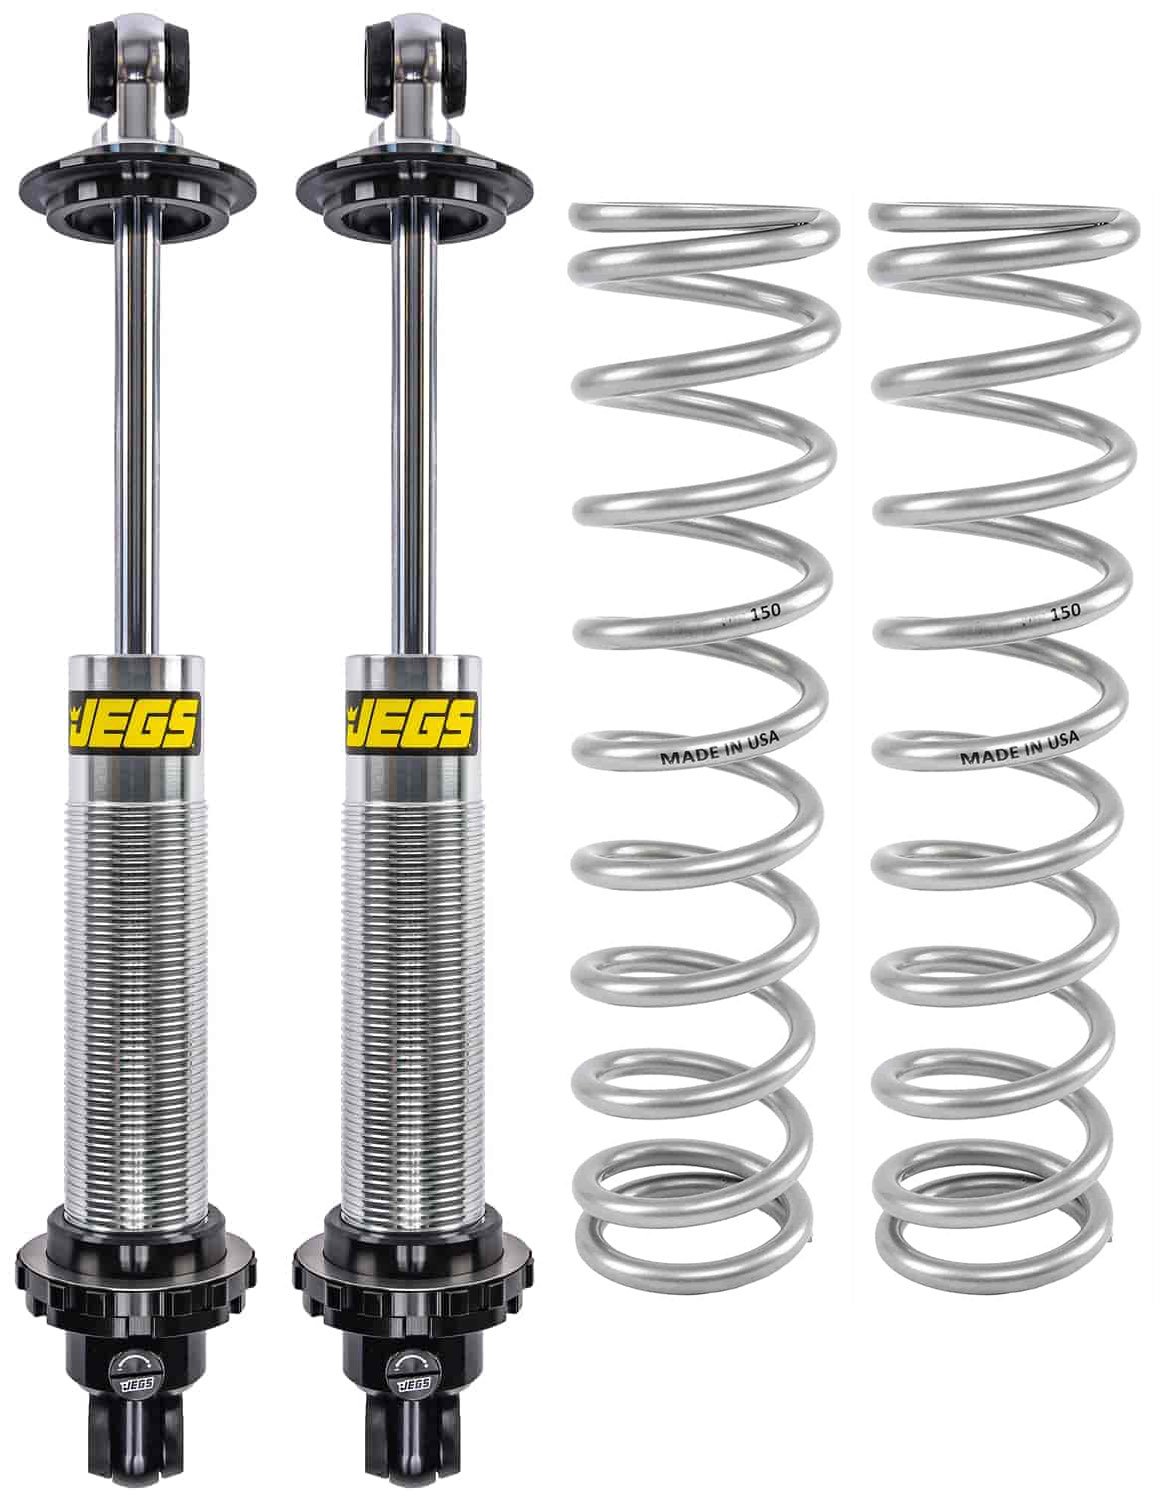 Single Adjustable Coil-Over Shocks and Coil-Over Springs Kit [14 in., 150 lbs./in. Springs]